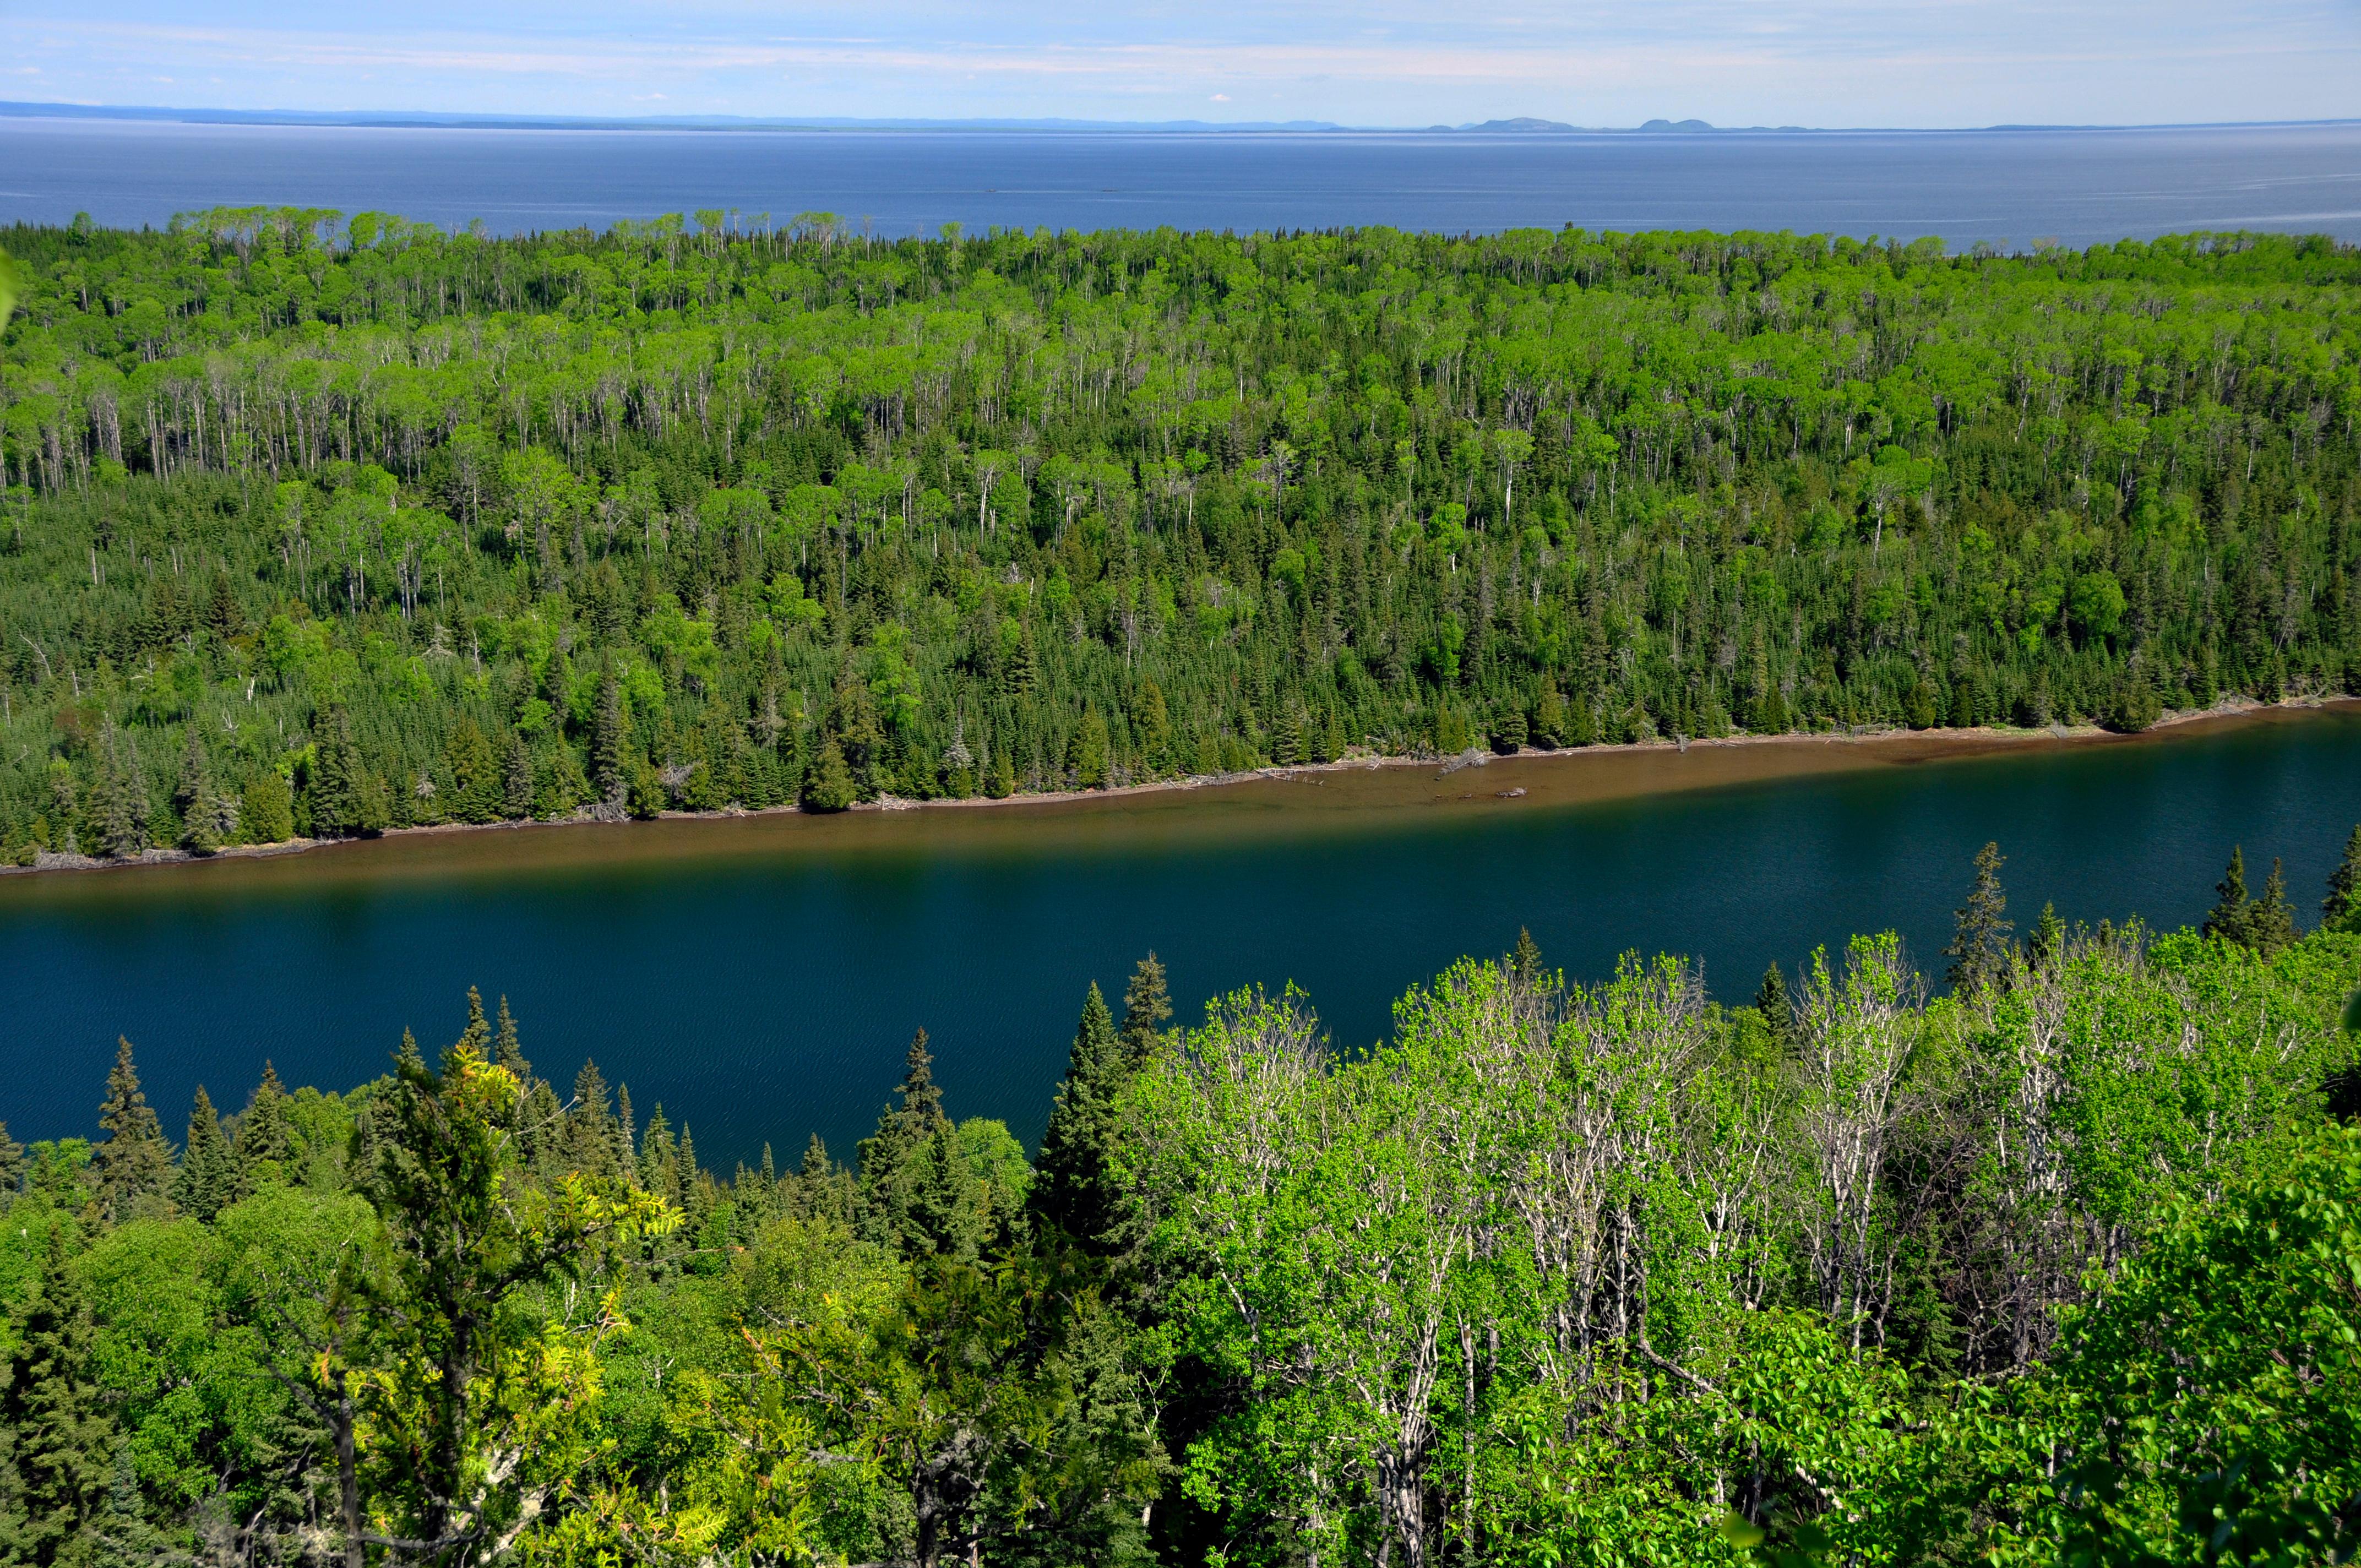 View from above the trees looking down at Duncan Bay Narrows, trees, Lake Superior, and Canada.